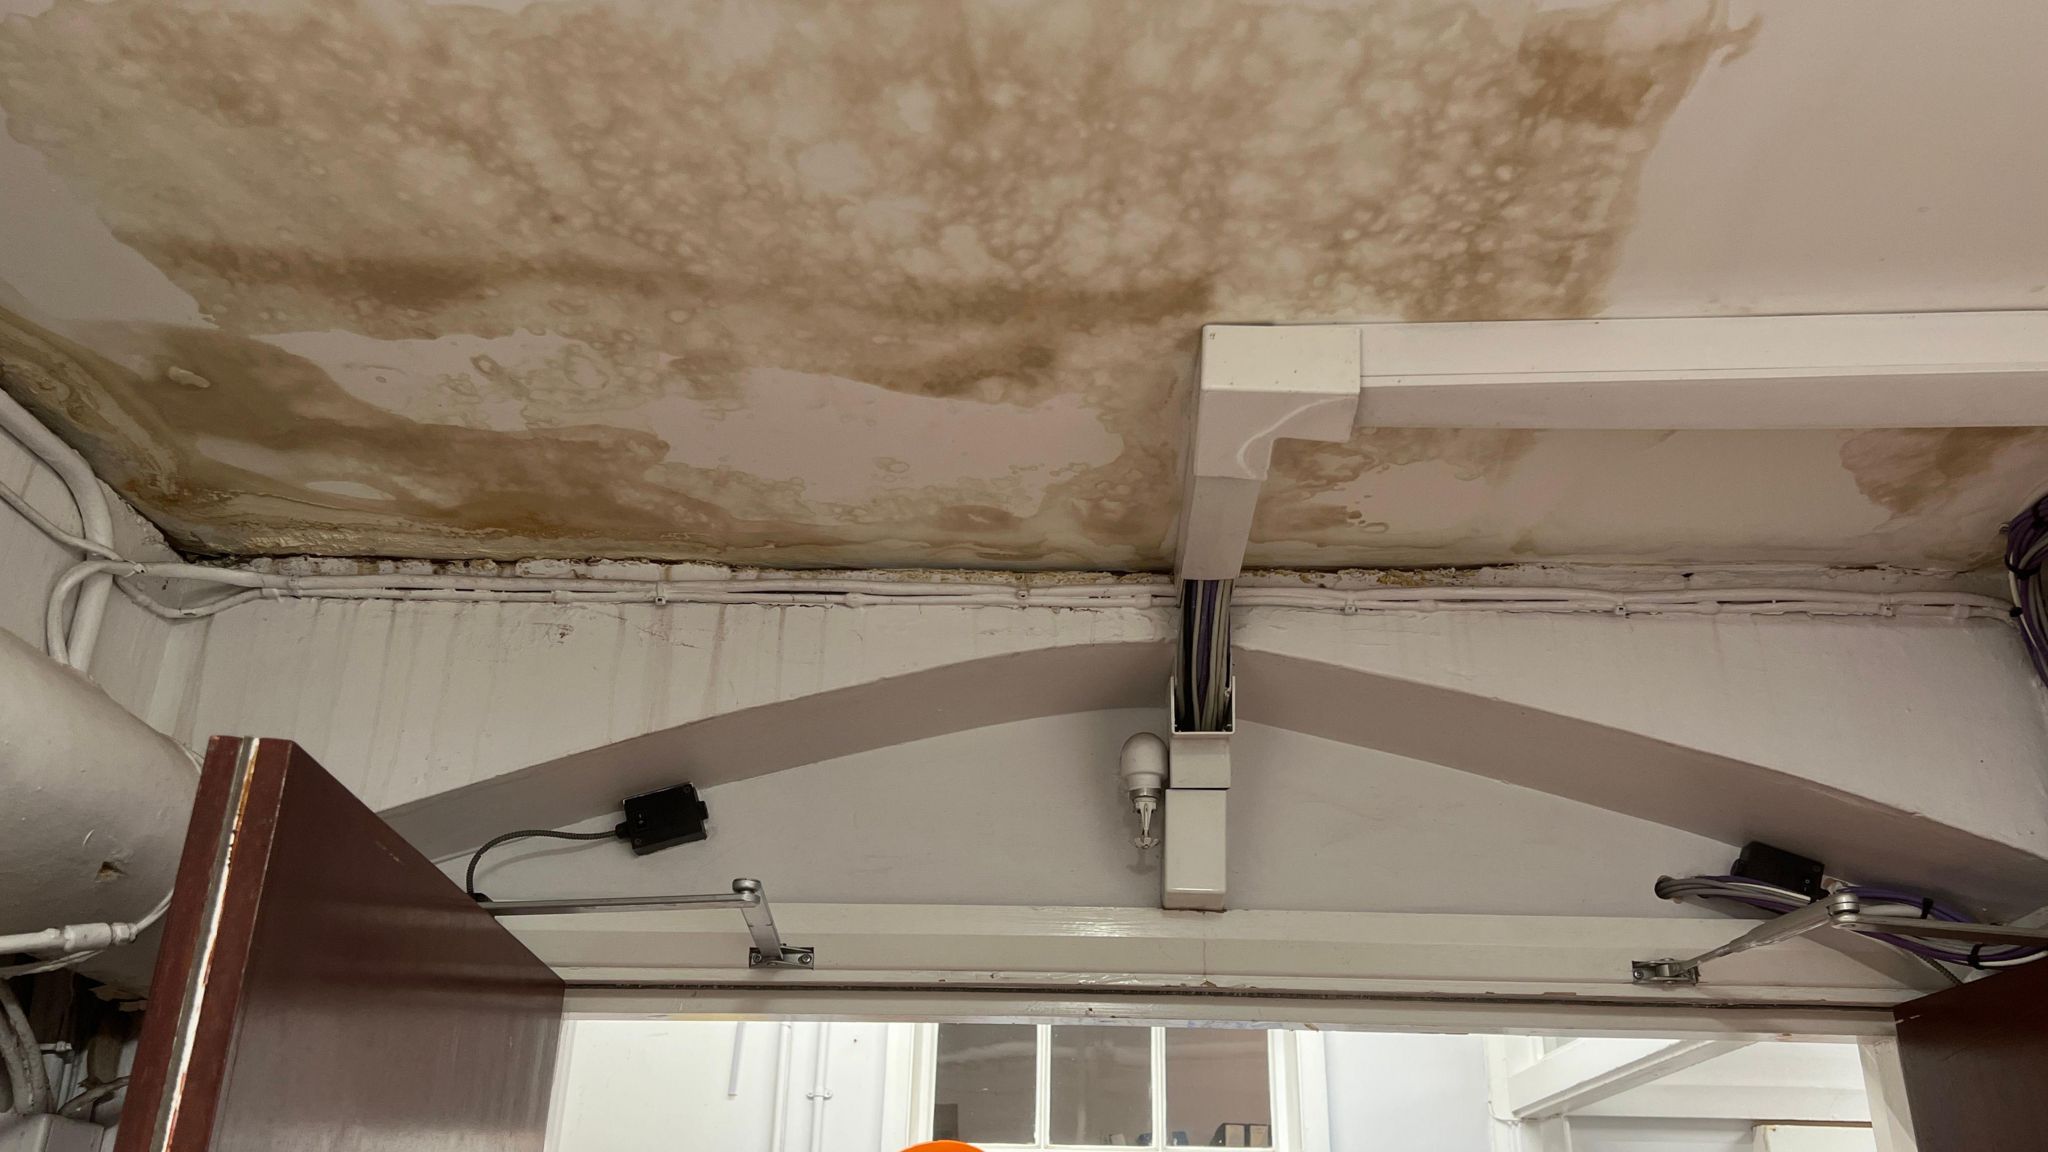 Mould visible on the ceiling of the ground floor of St Peter's Hospital, Maldon